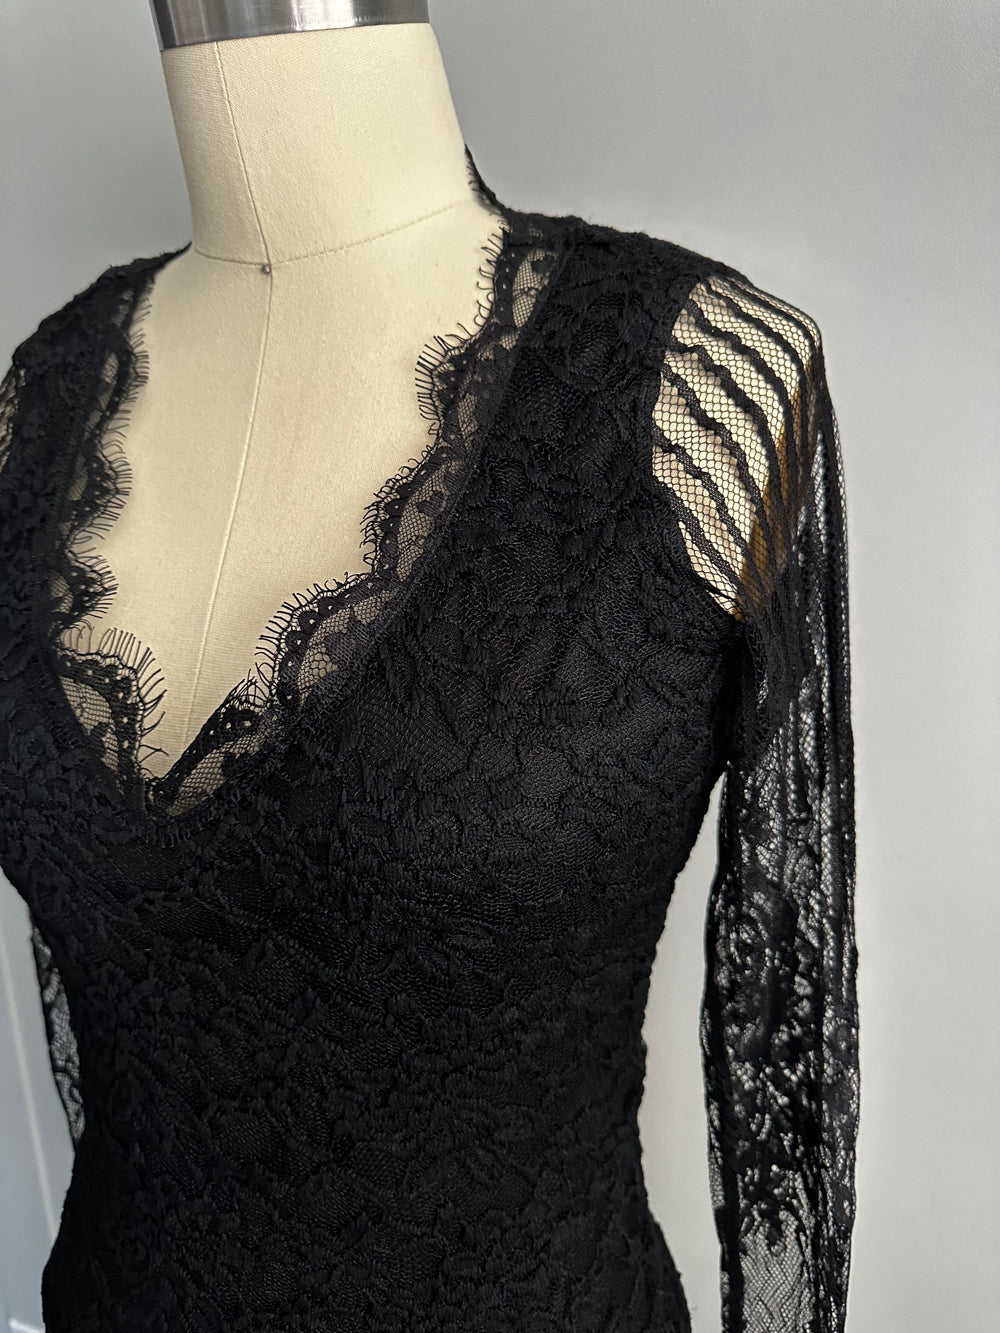 Victorian Lace Top